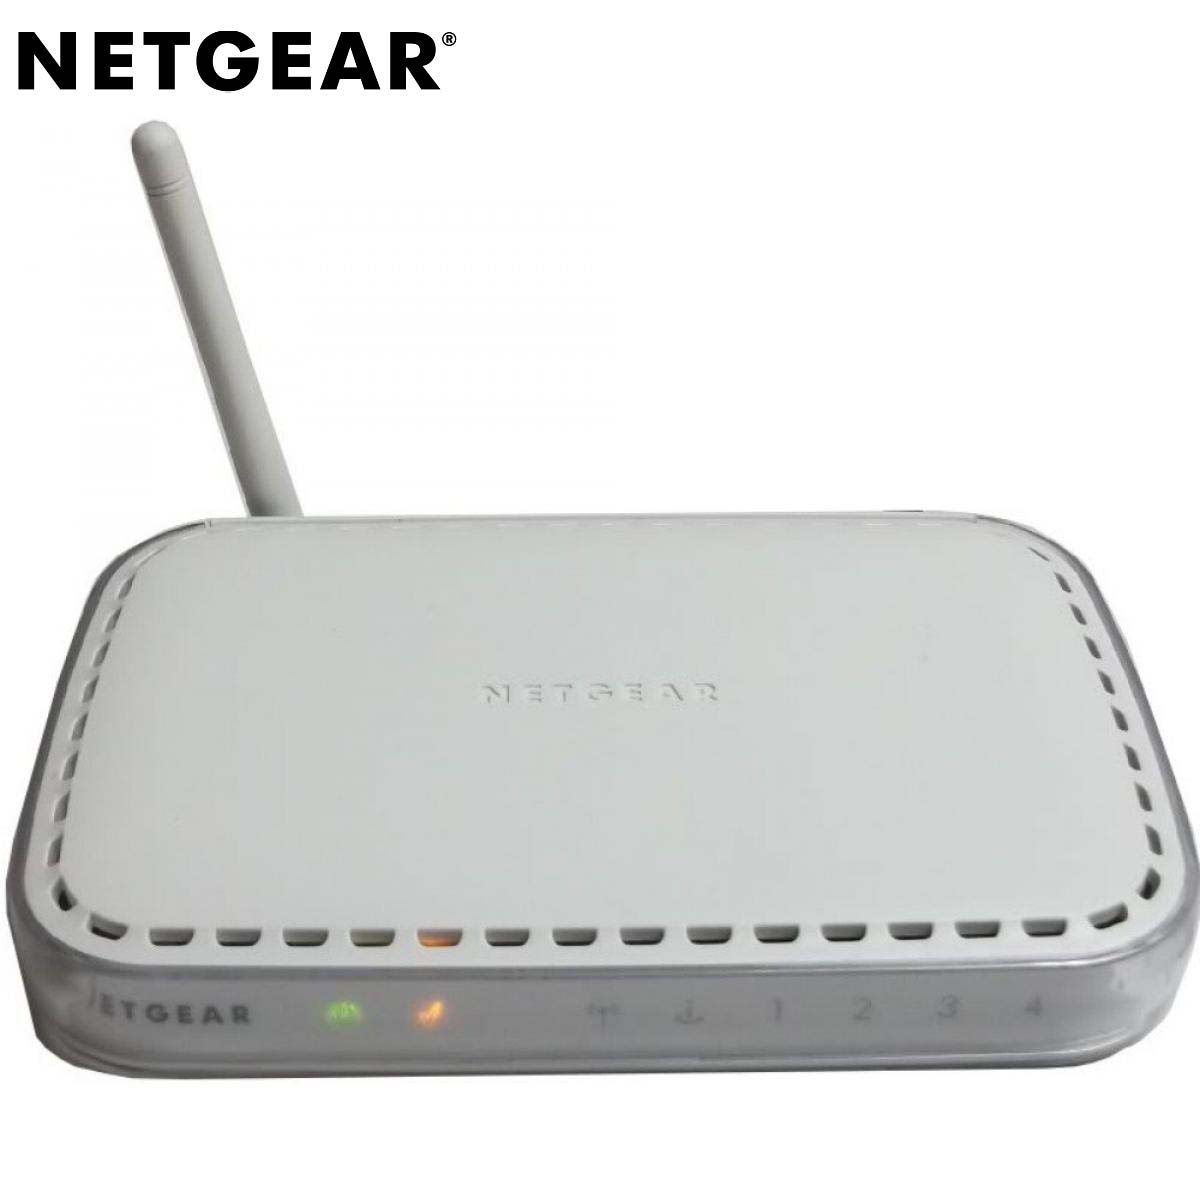 Wireless G Router 54Mbps